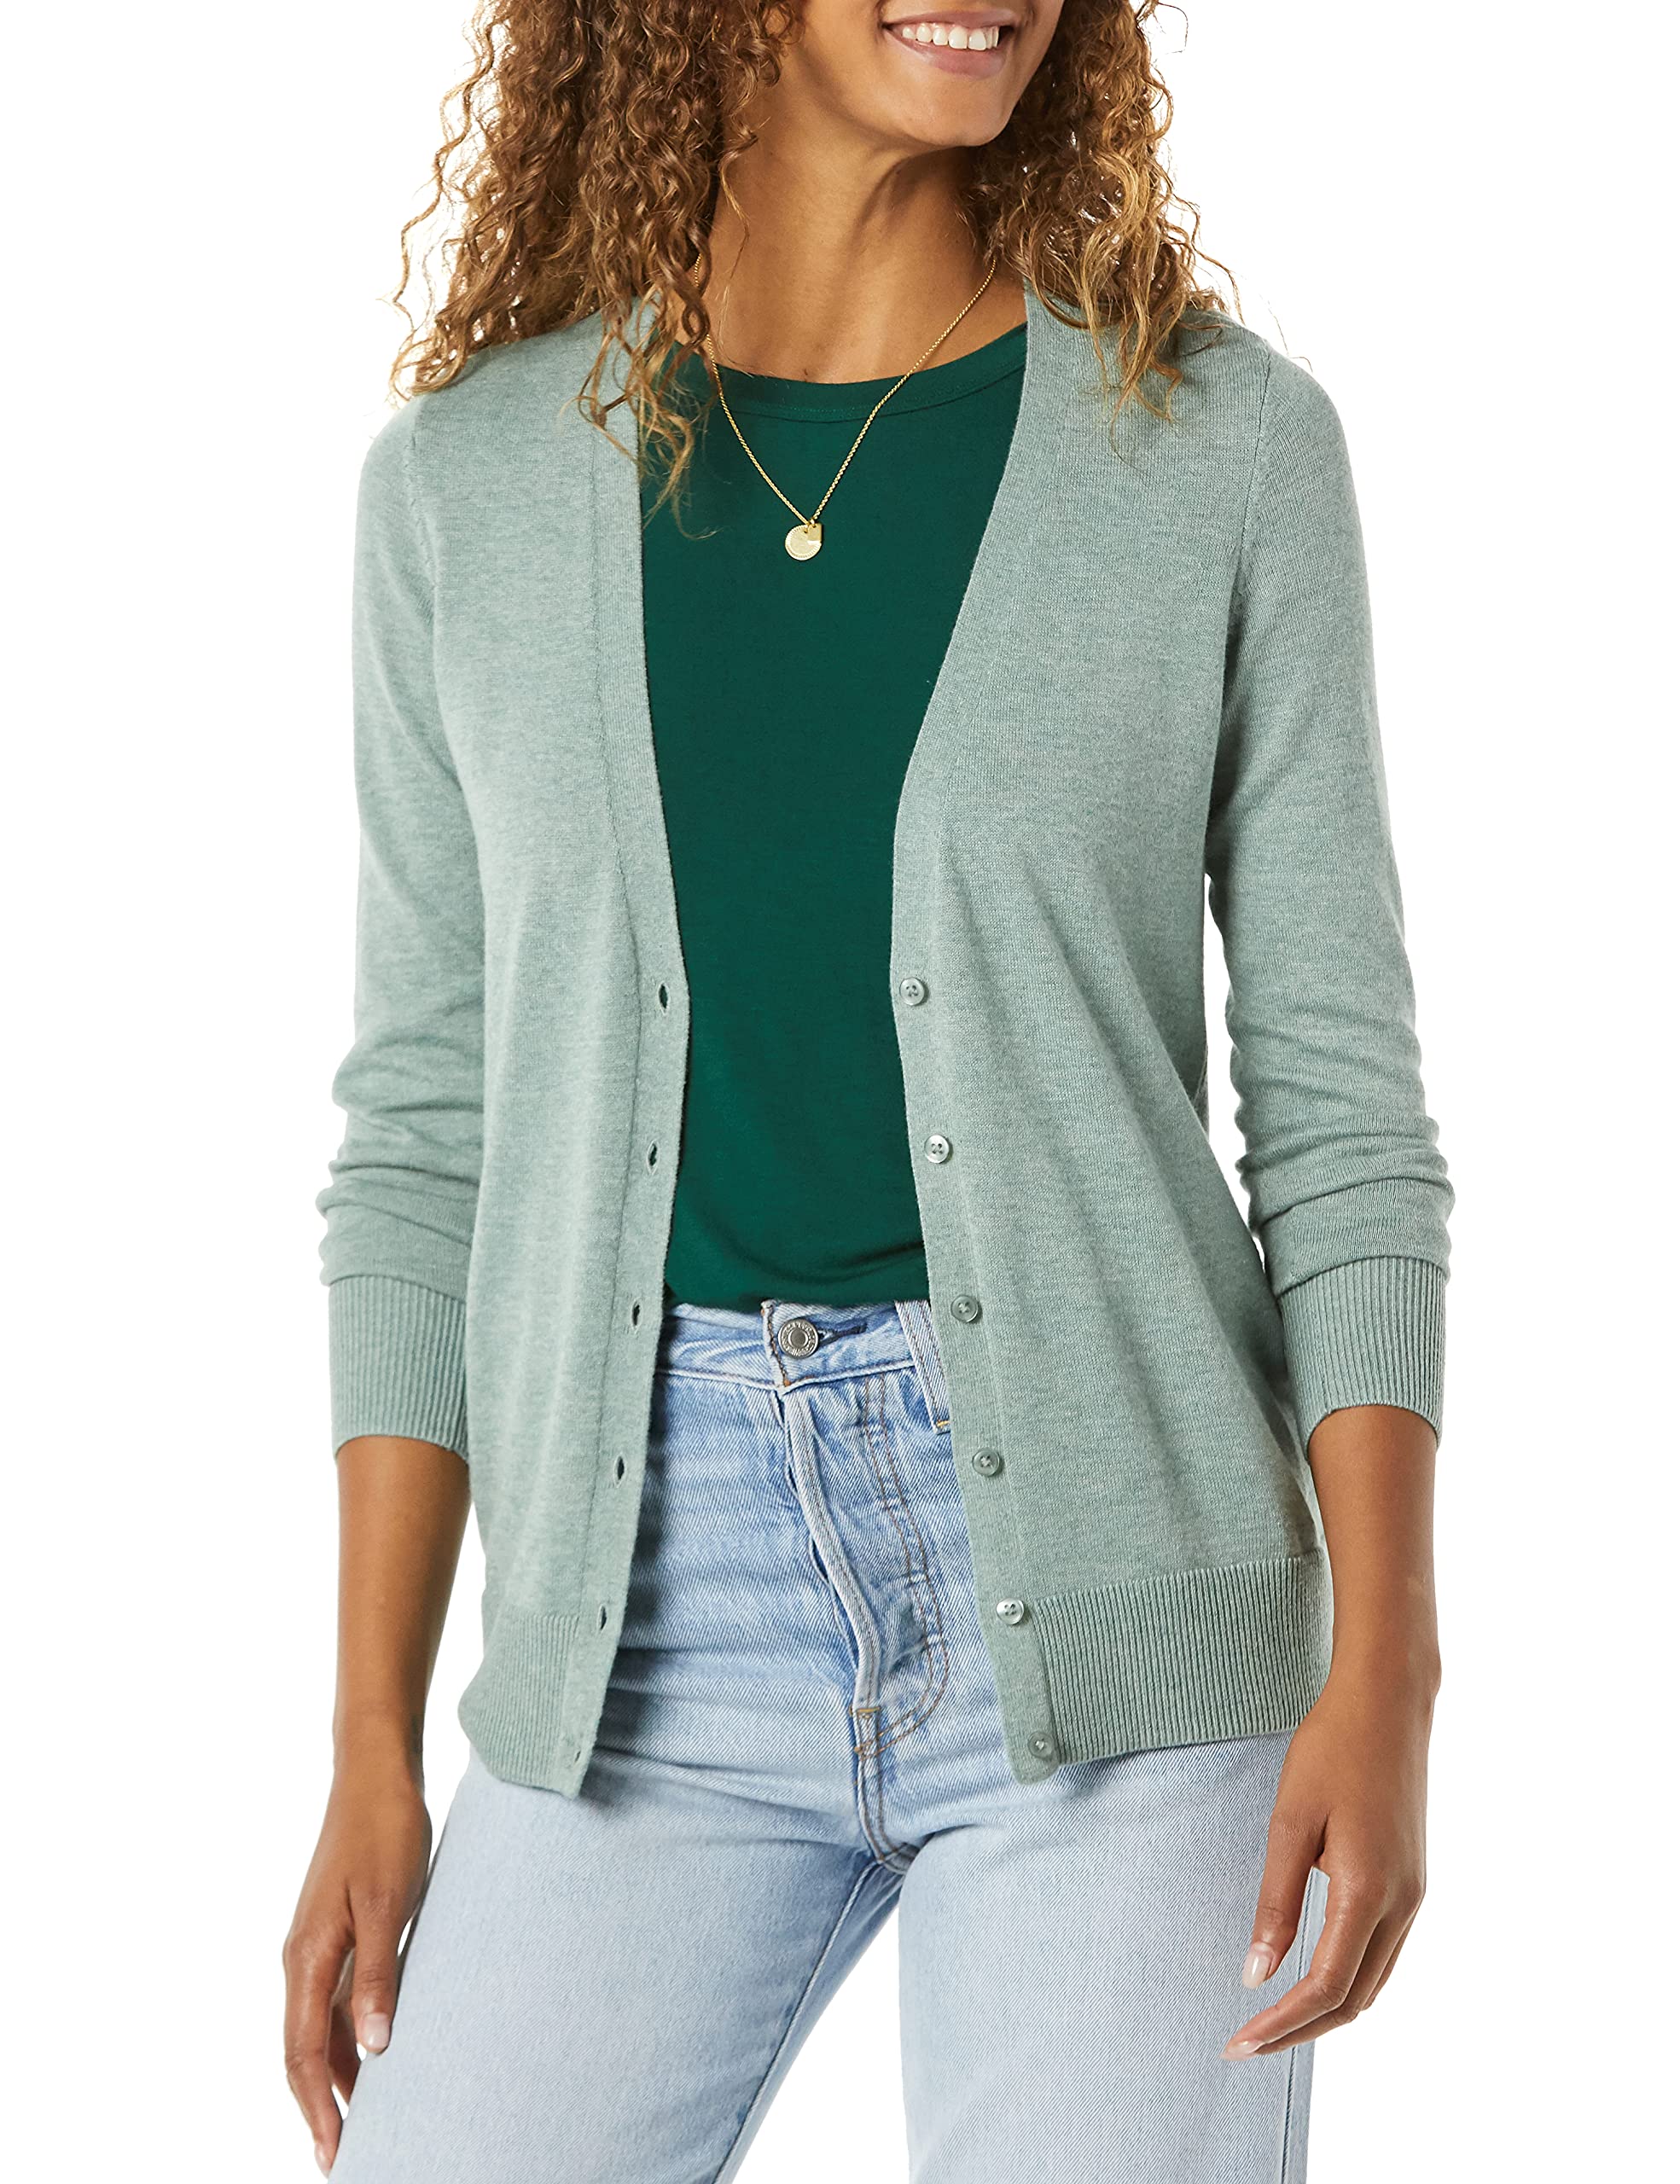 Amazon Essentials Women's Lightweight Vee Cardigan Sweater (Available in Plus Size)